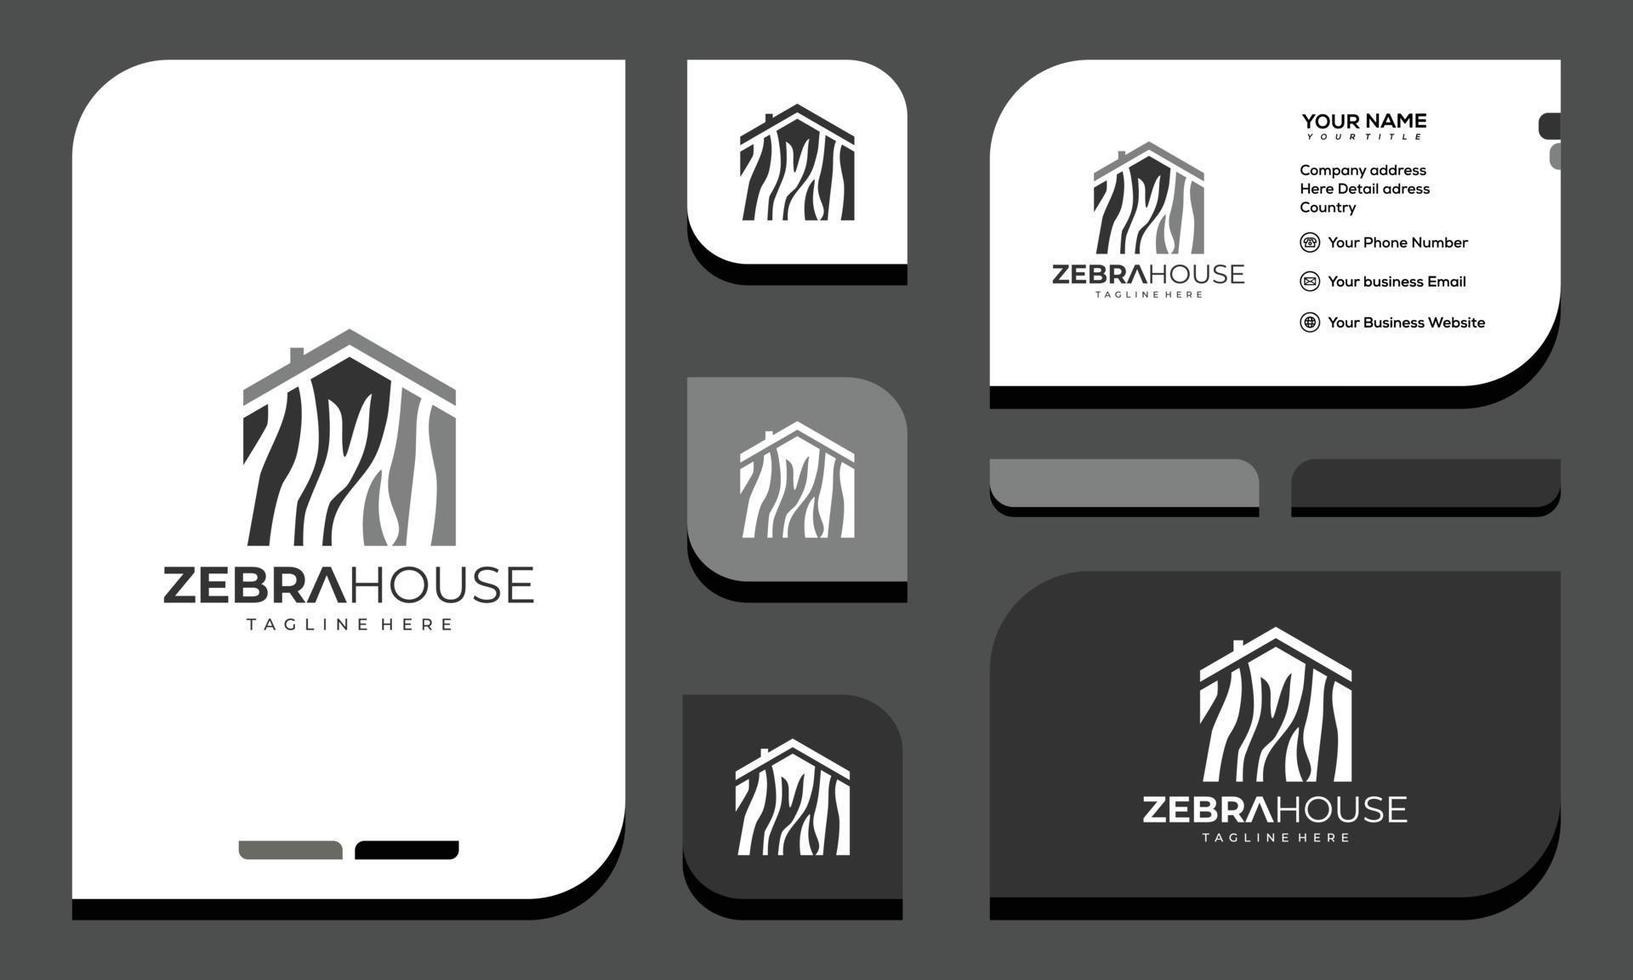 Zebra with house Logo Design. white animal with black stripes.logo design and business card vector